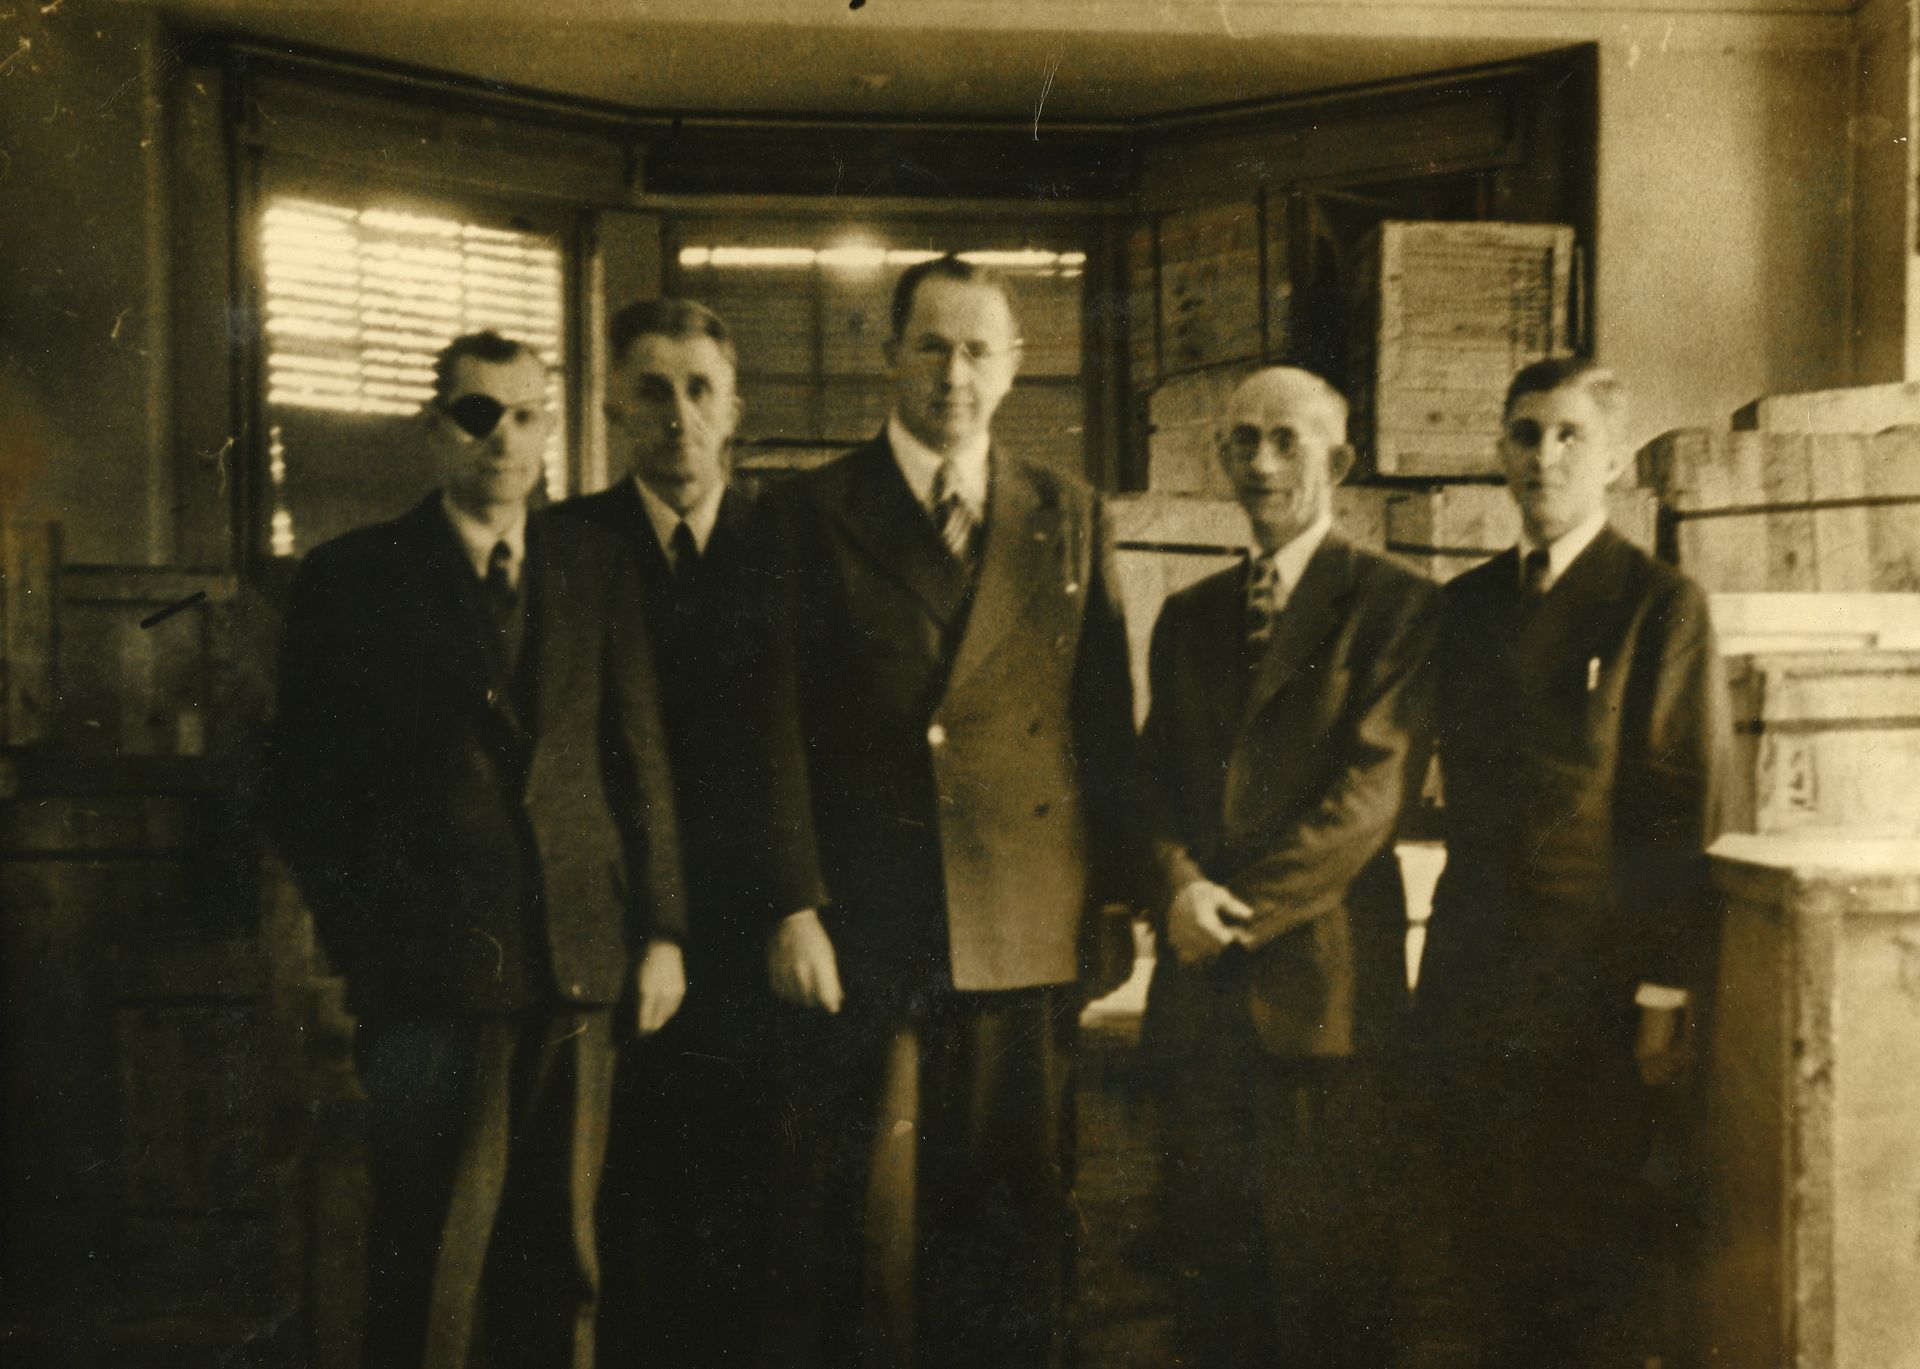 President Ezra Taft Benson standing with other men during a visit to the European Mission in 1946.